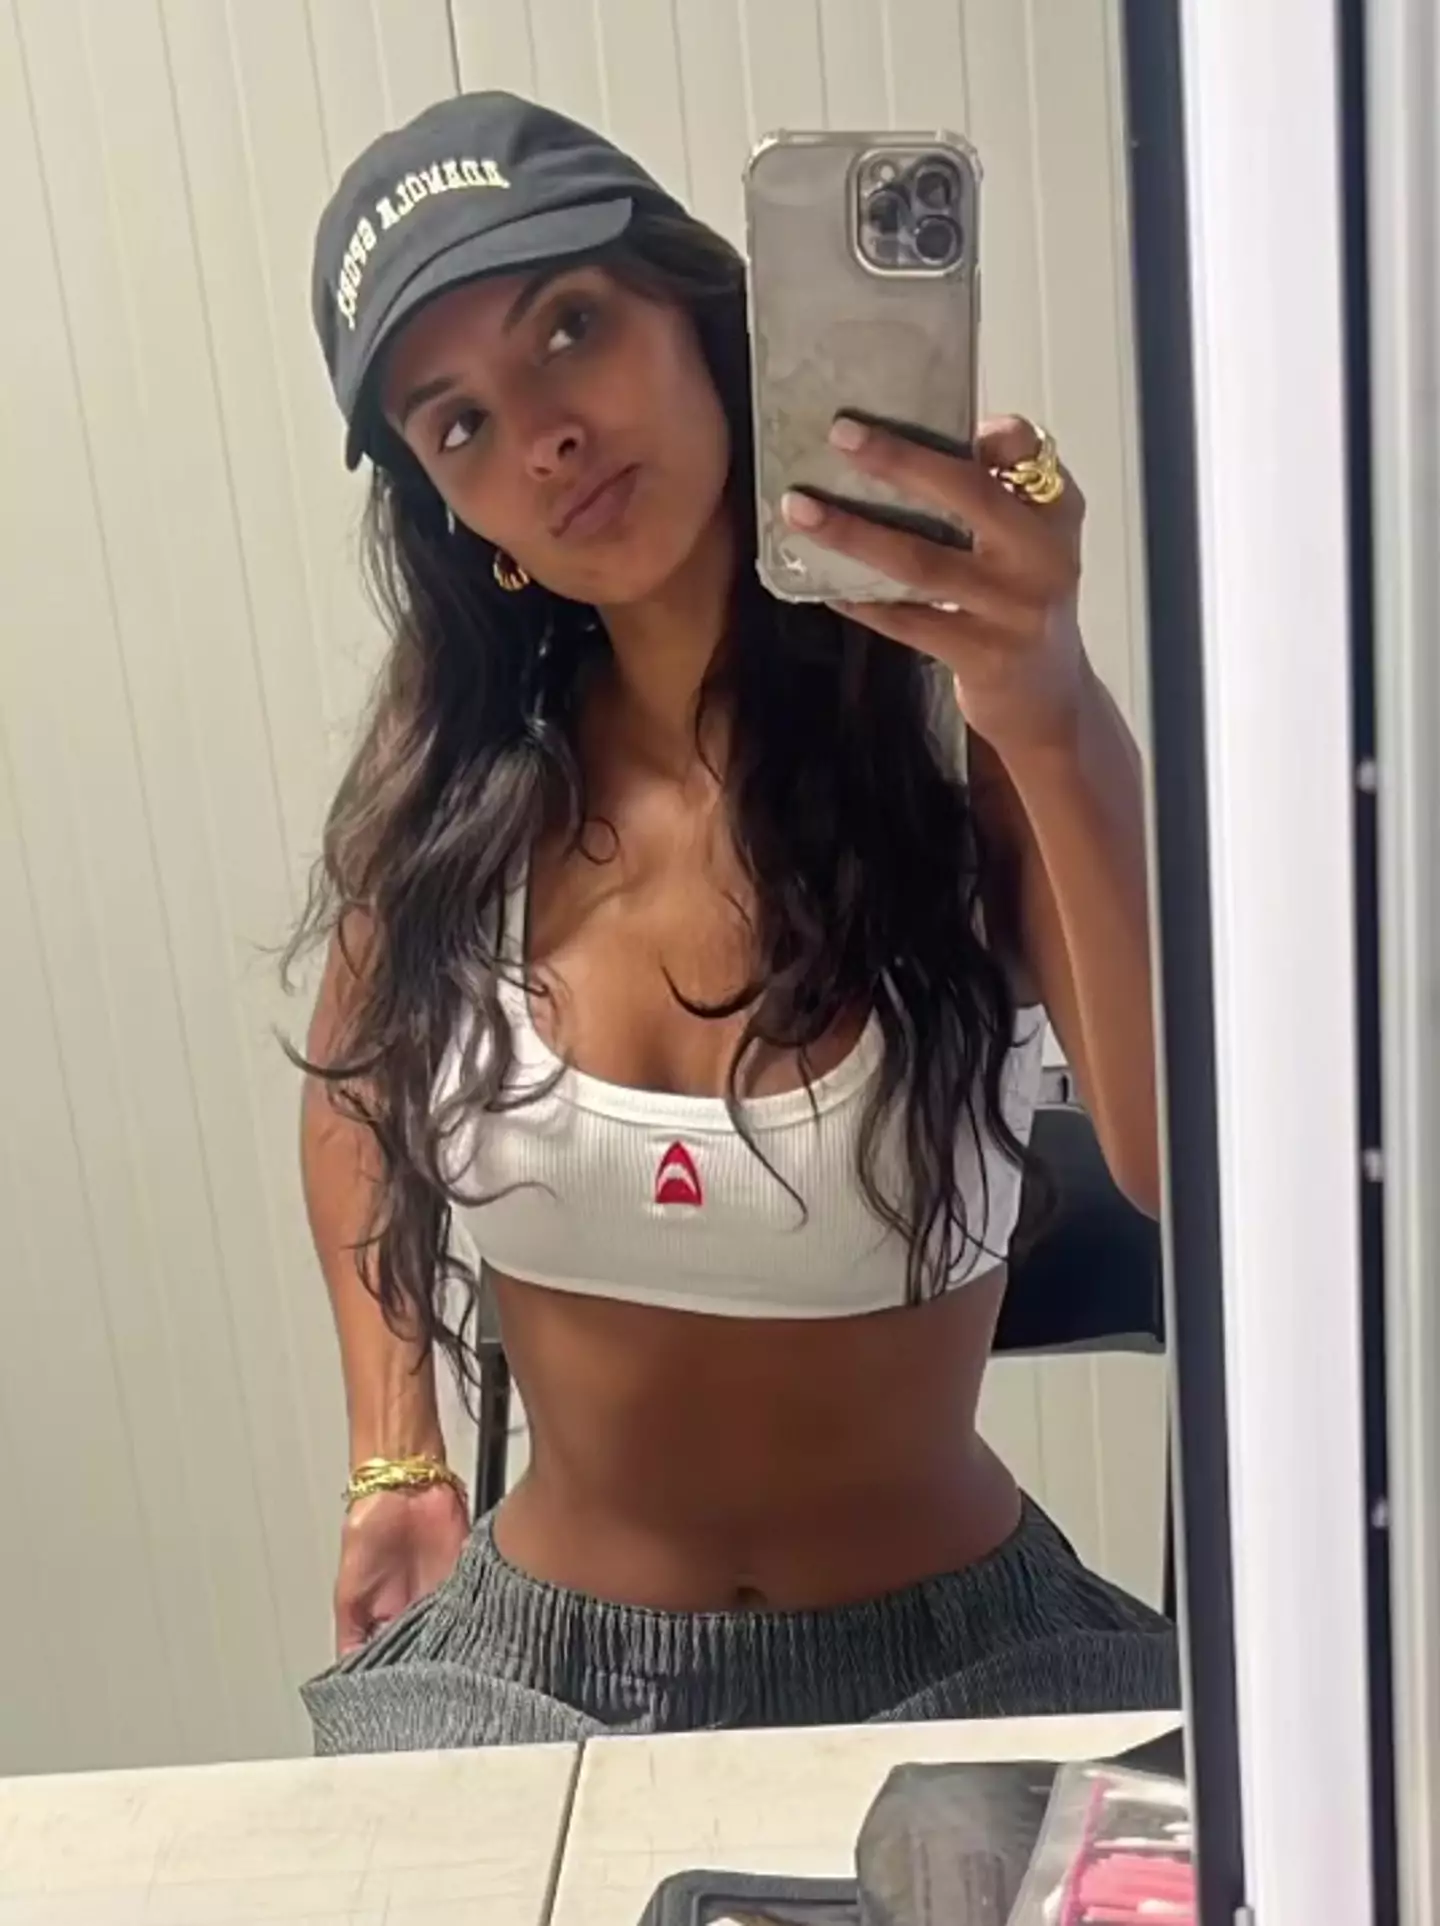 Maya Jama gave fans an 'insight' into some of the DMs she receives. (Instagram/@mayajama)